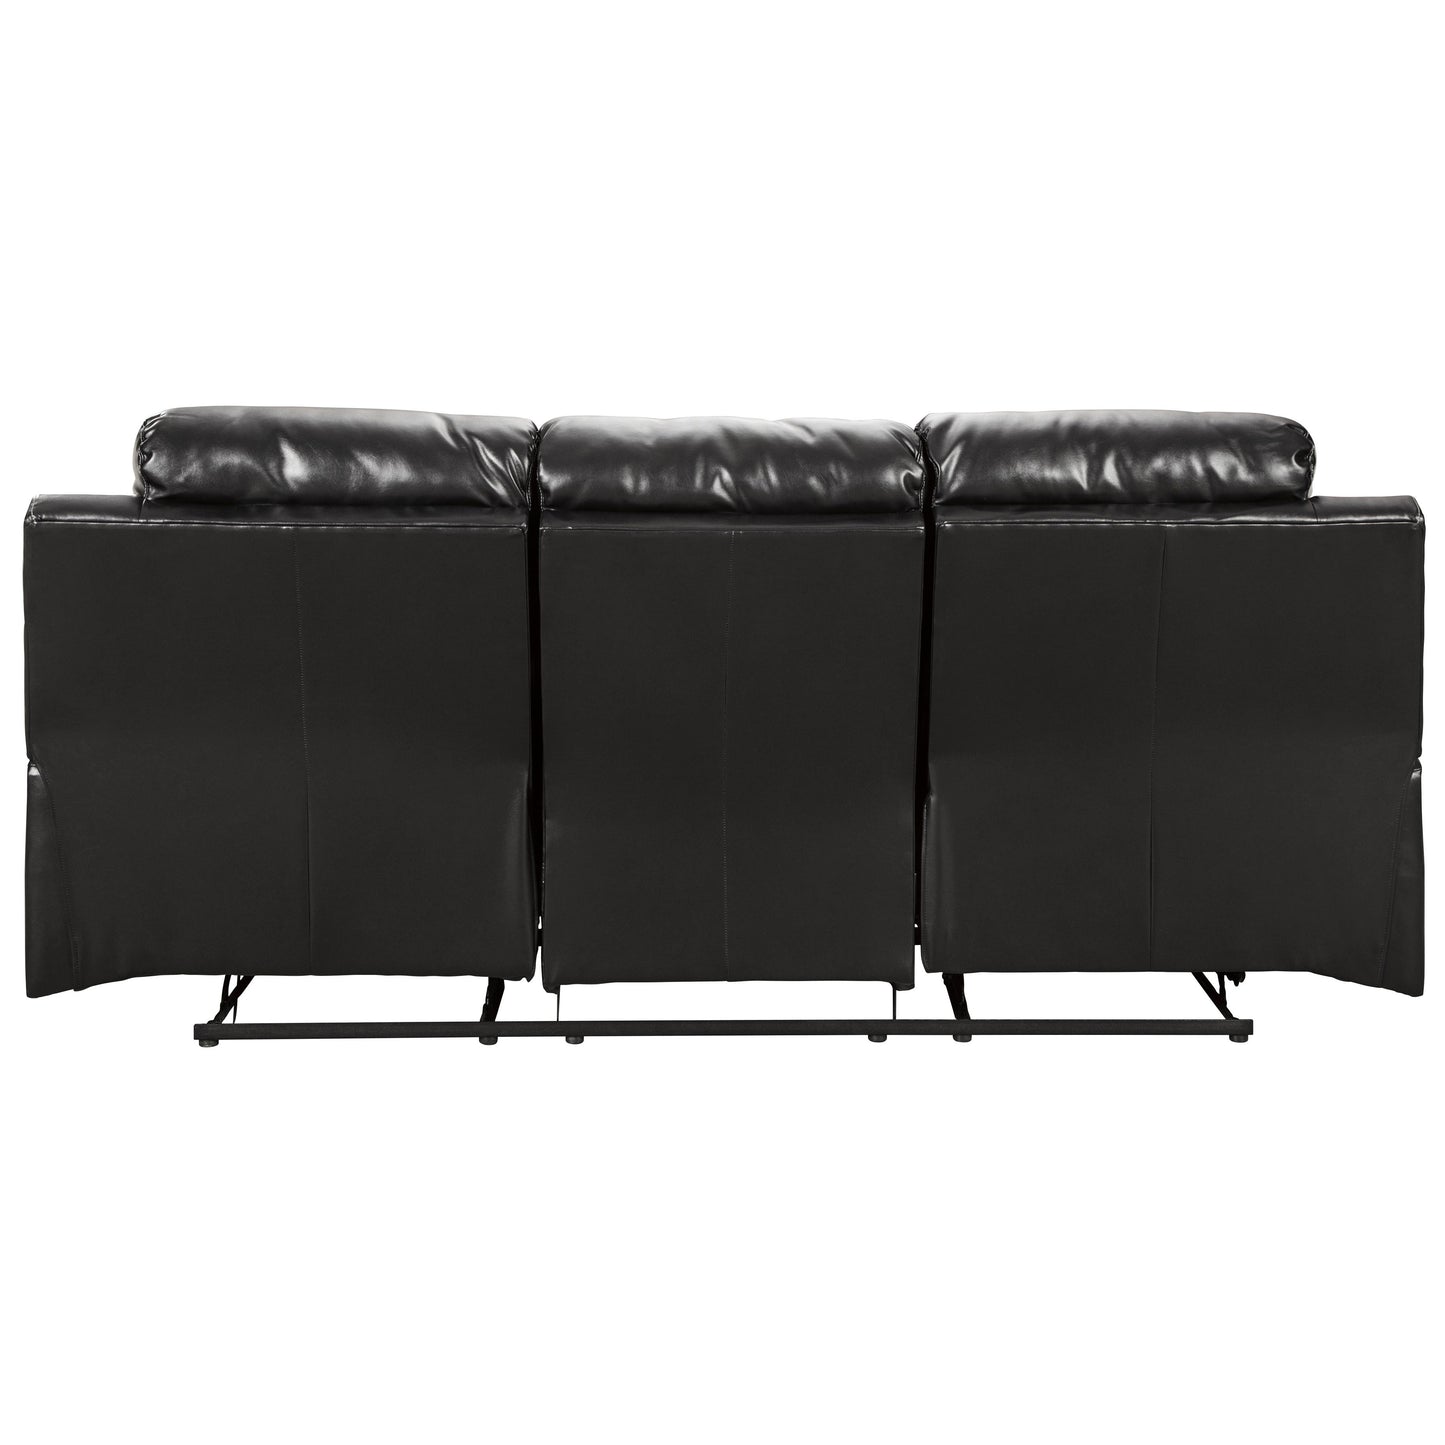 Signature Design by Ashley Kempten Reclining Leather Look Sofa 8210588